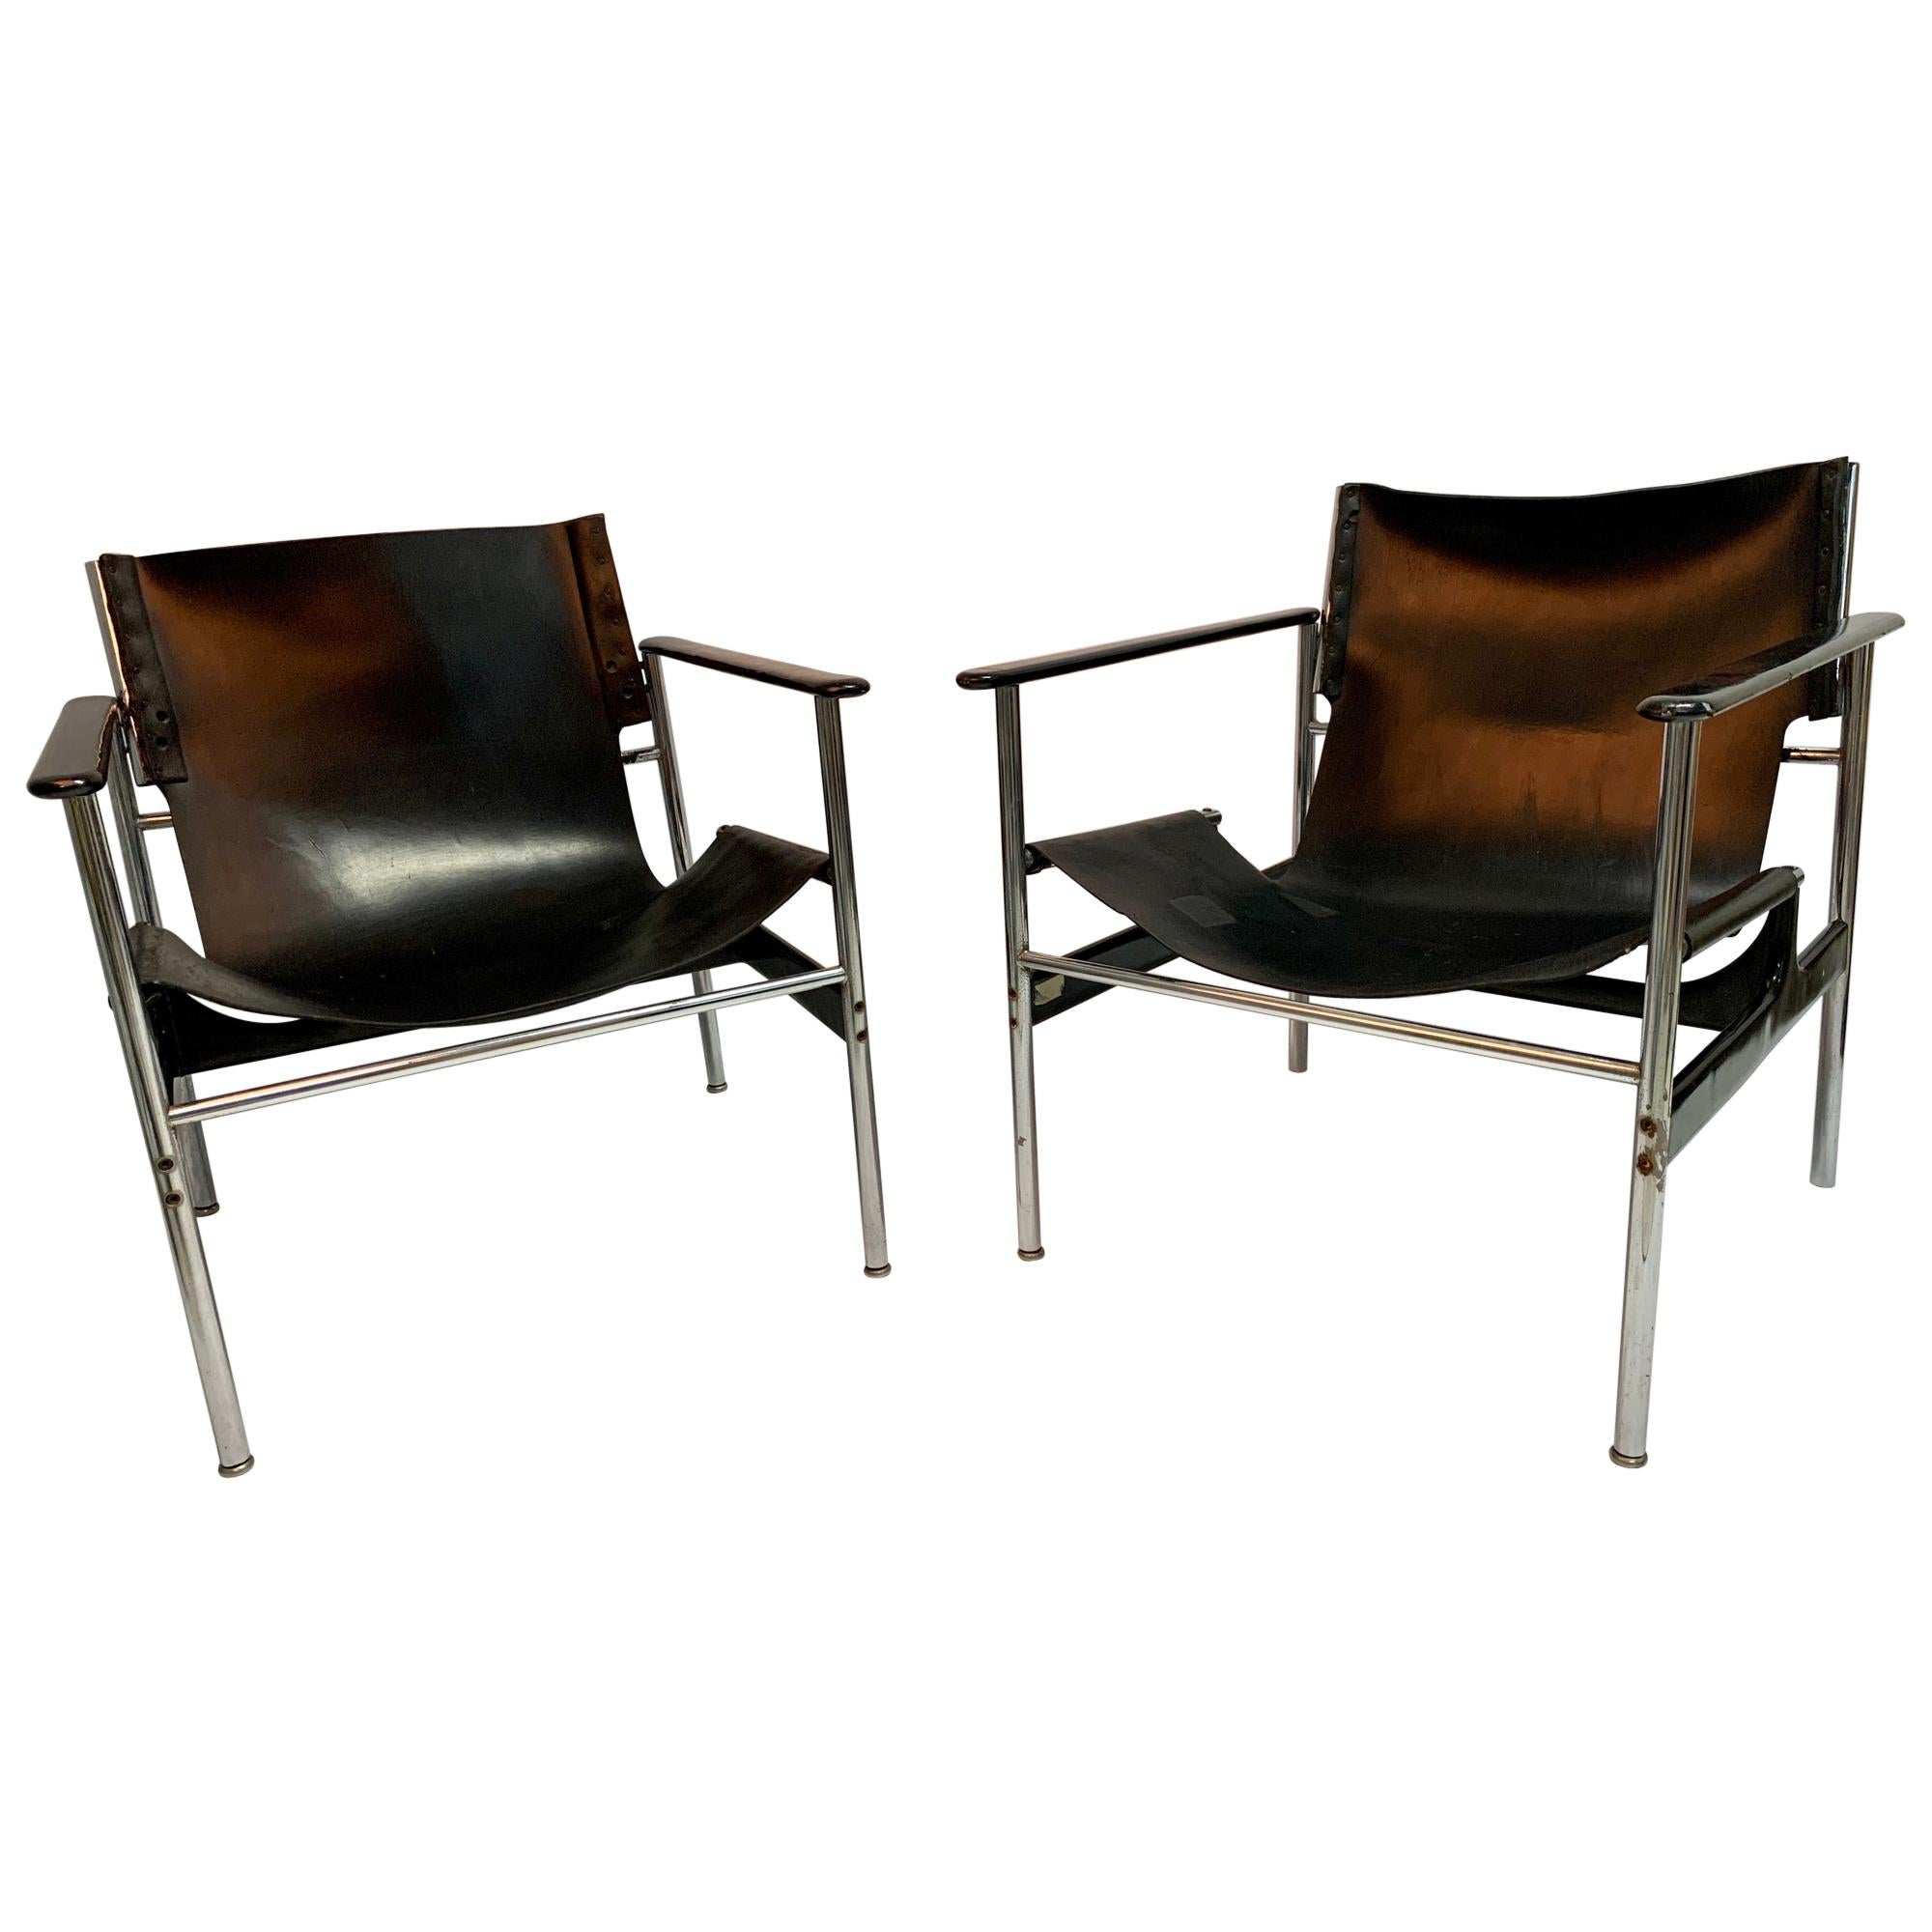 Pair of Pollock Sling Chairs 657 for Knoll, First Generation, 1970-1972